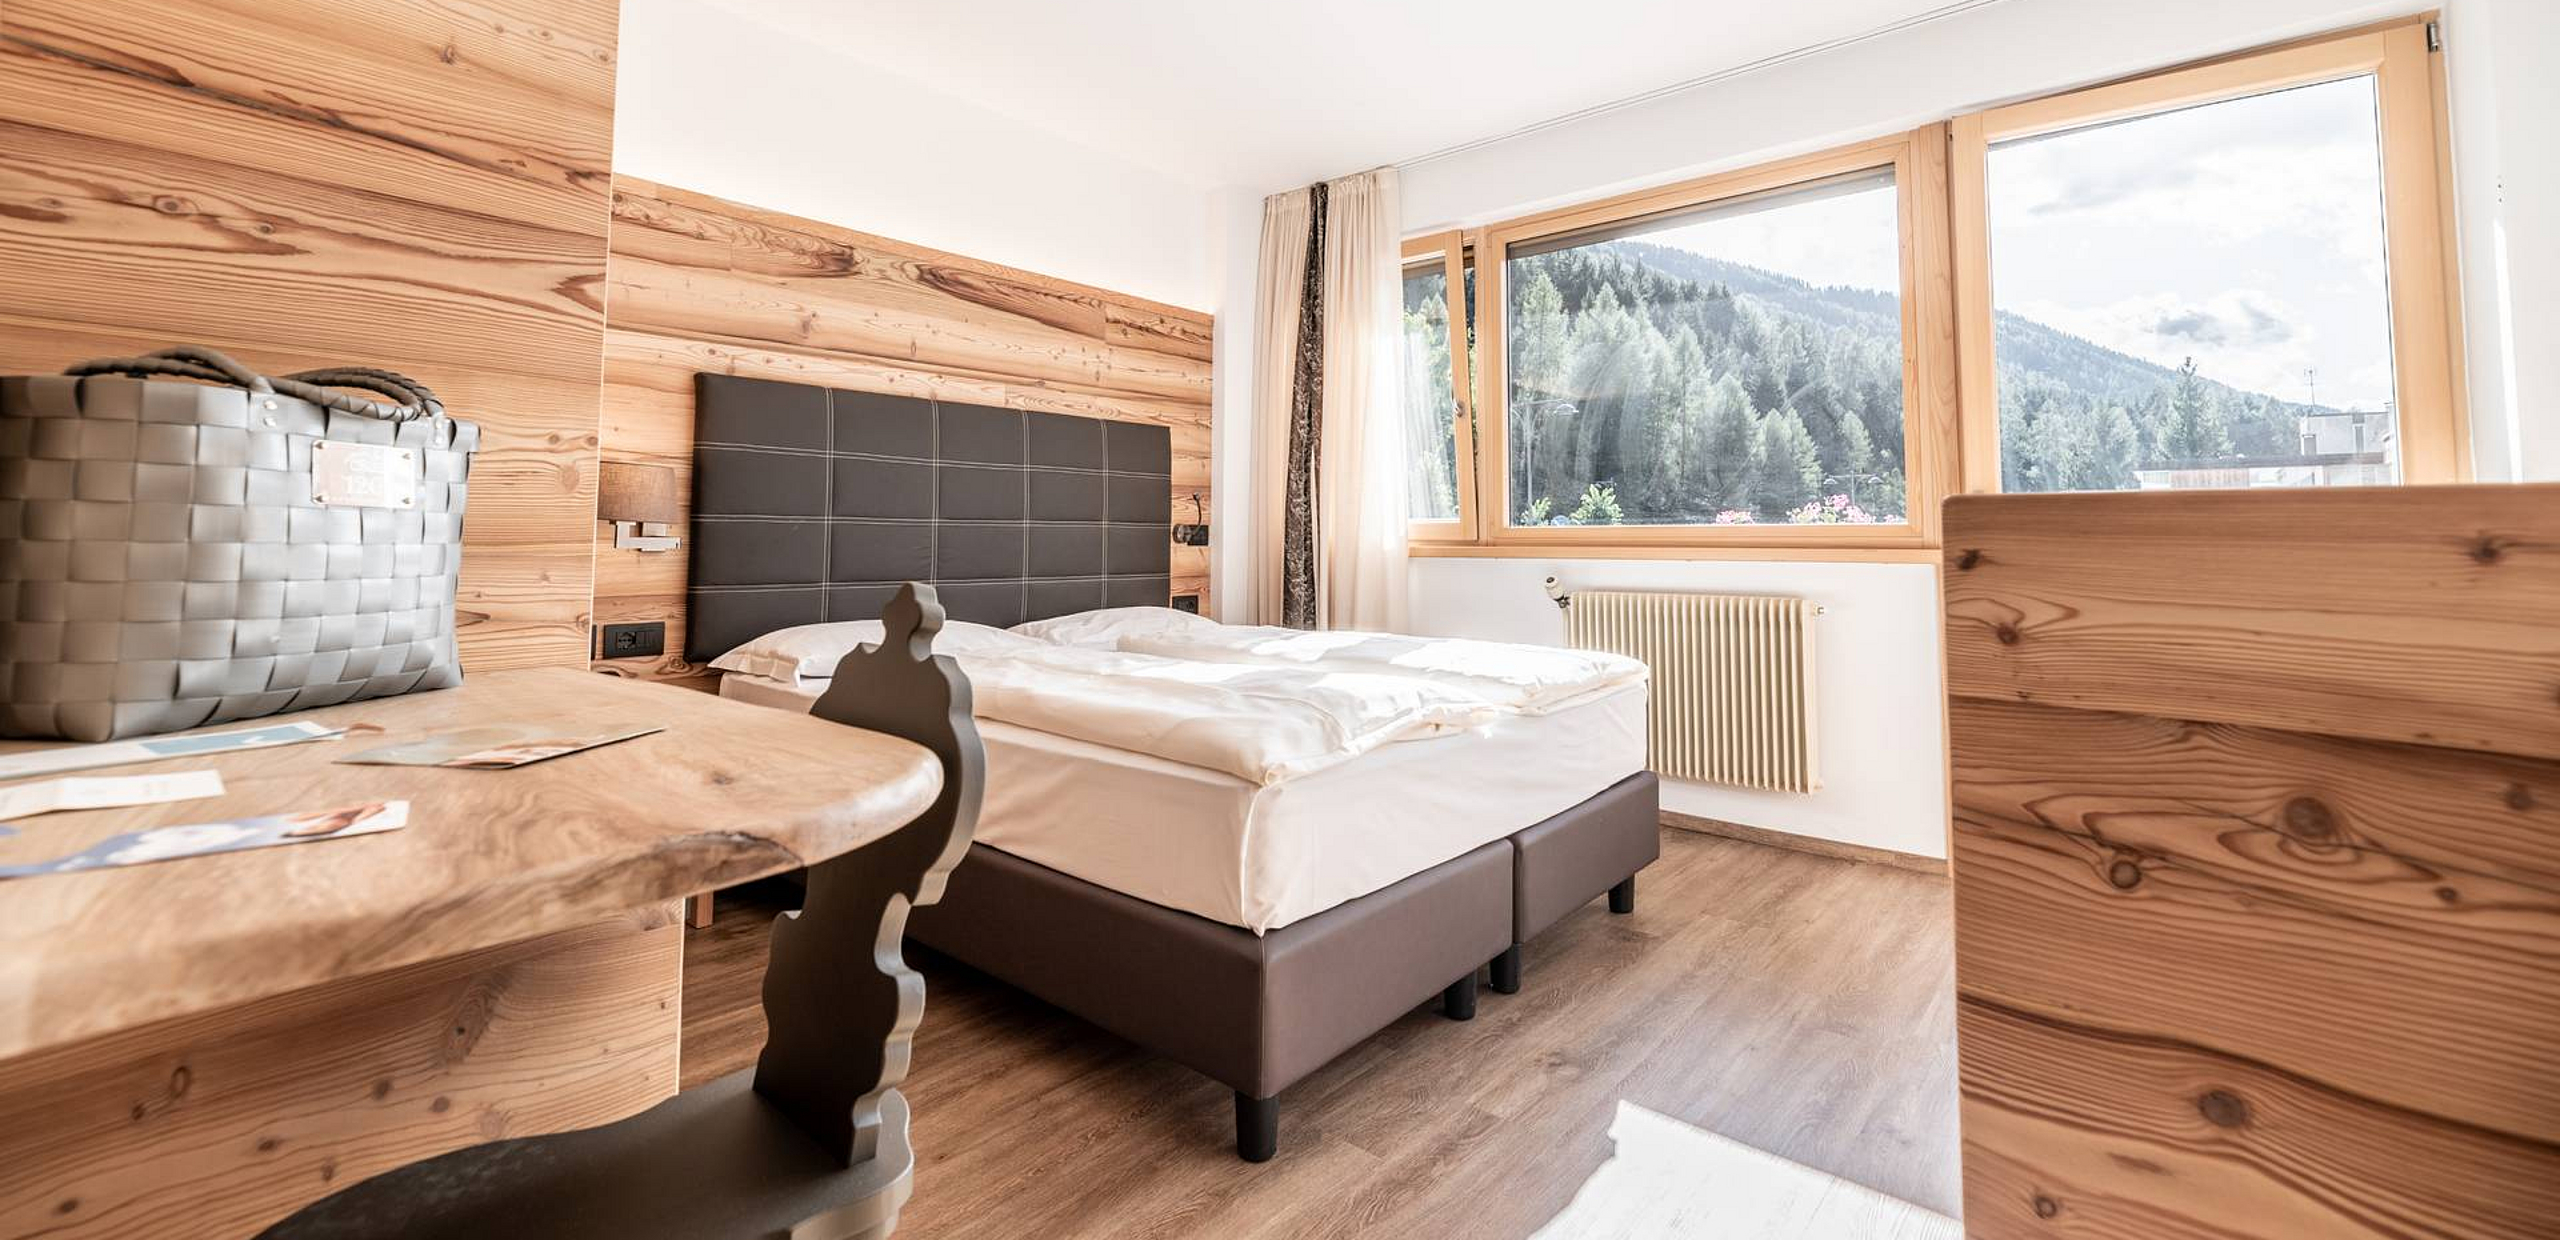 Double rooms at the 3-star sup. hotel in Val di Sole